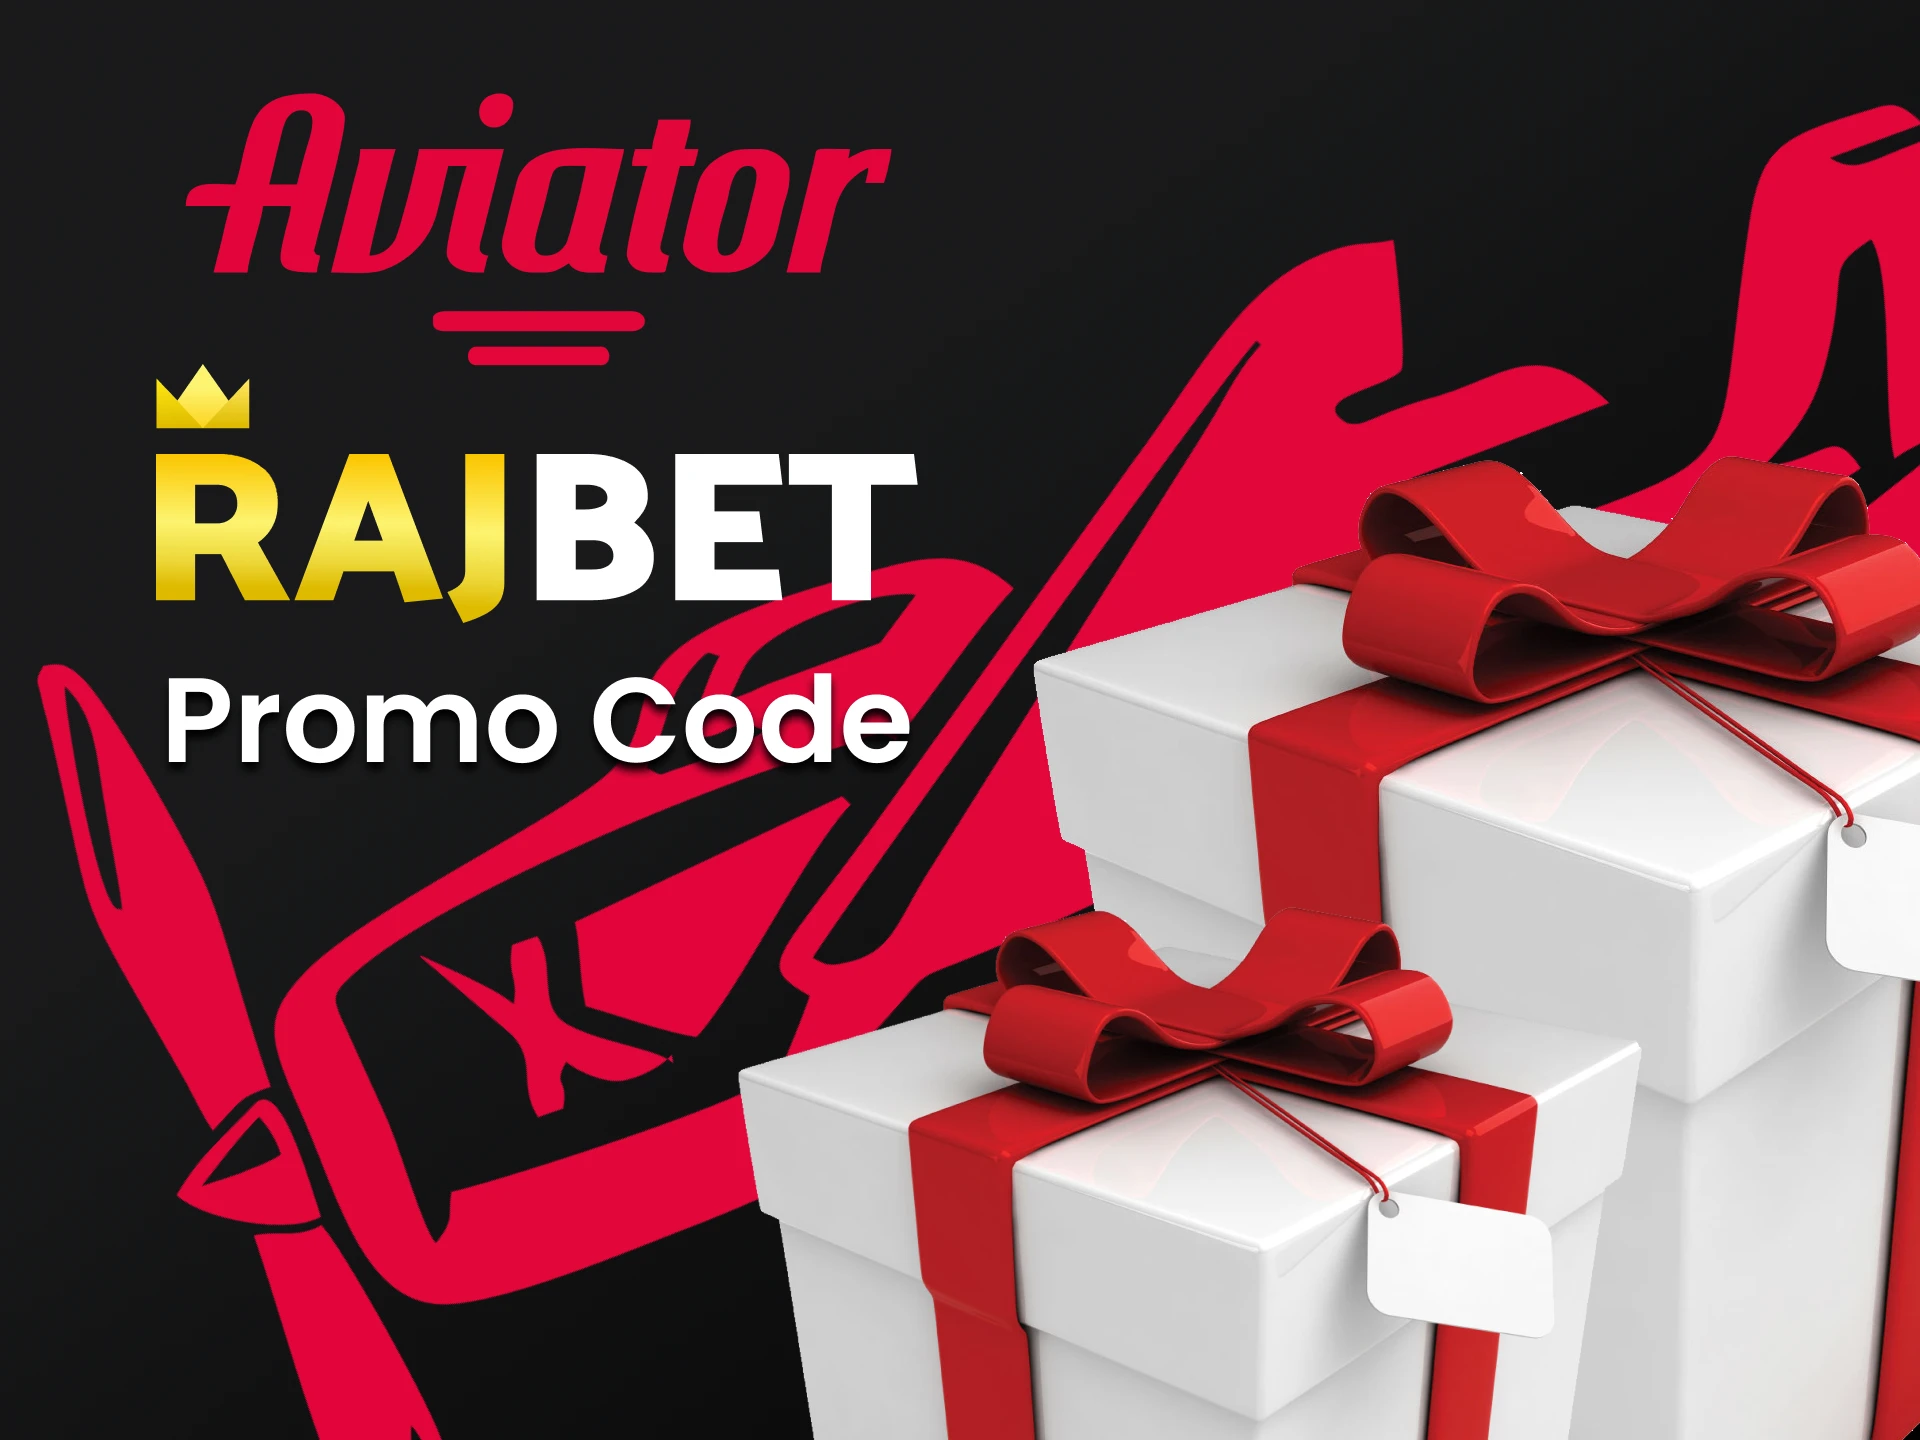 Use a special code to get an additional bonus from Rajbet.